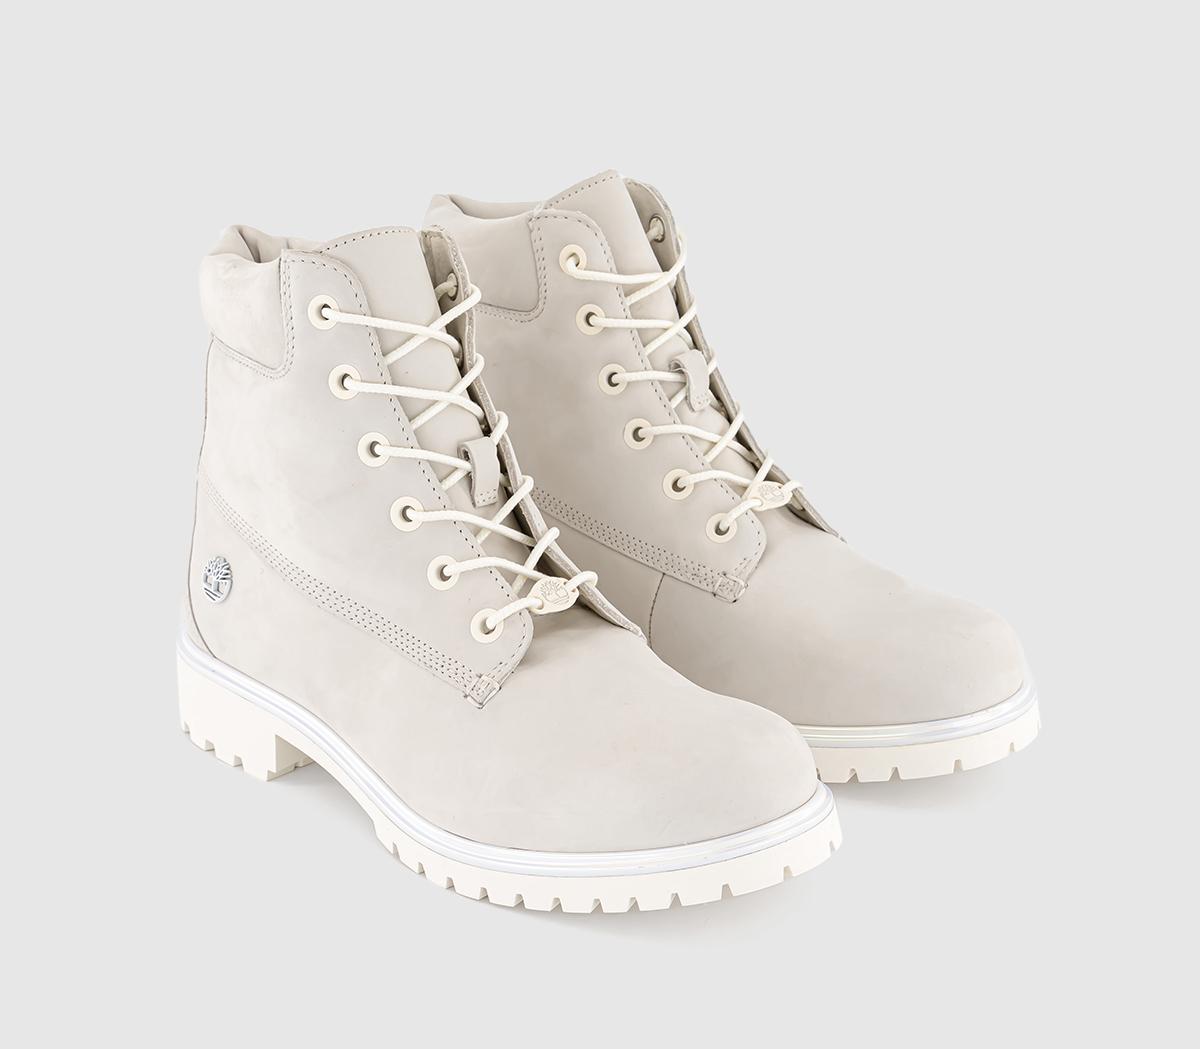 Timberland Womens Lyonsdale Boots Cream Irridescent Natural, 8